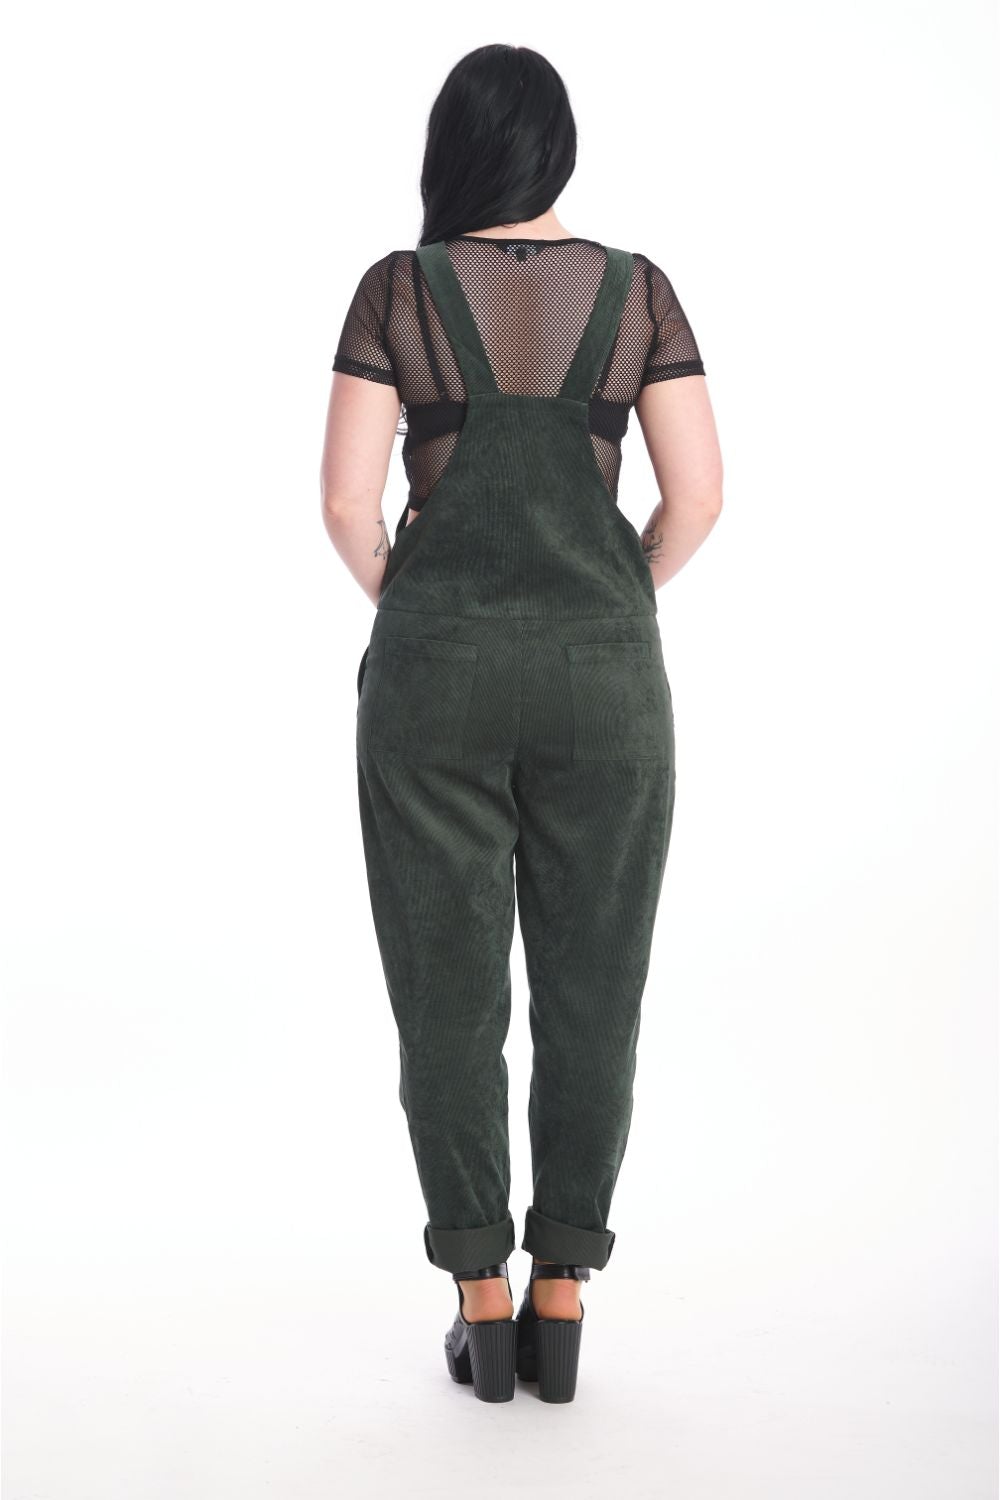 Back of alternative model in moss green dungarees with black mesh crop top underneath. 